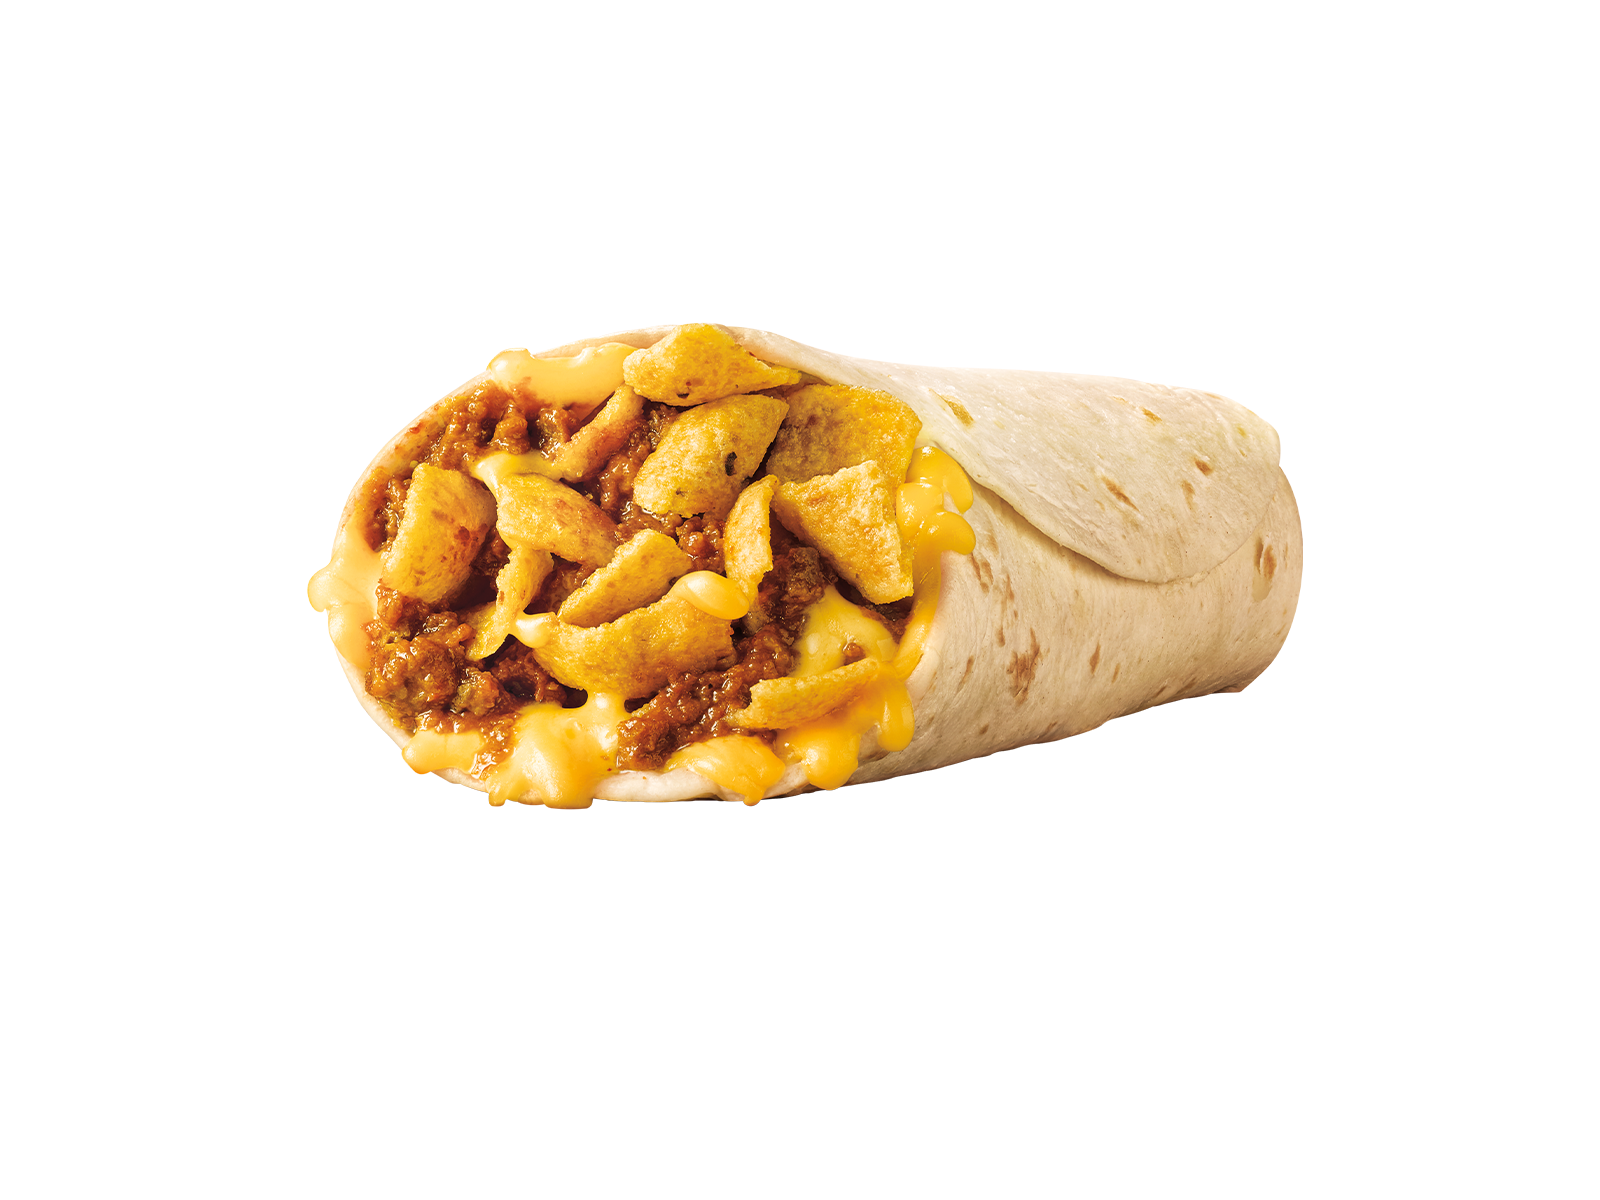 https://images.ctfassets.net/2iottqjdrp5h/1daIWIdXbllH3r1VXOKfZl/f6c82fdb46ecbf1e9e39f68a8a6d431b/Fritos_Chili_Cheese_Jr_Wrap.png